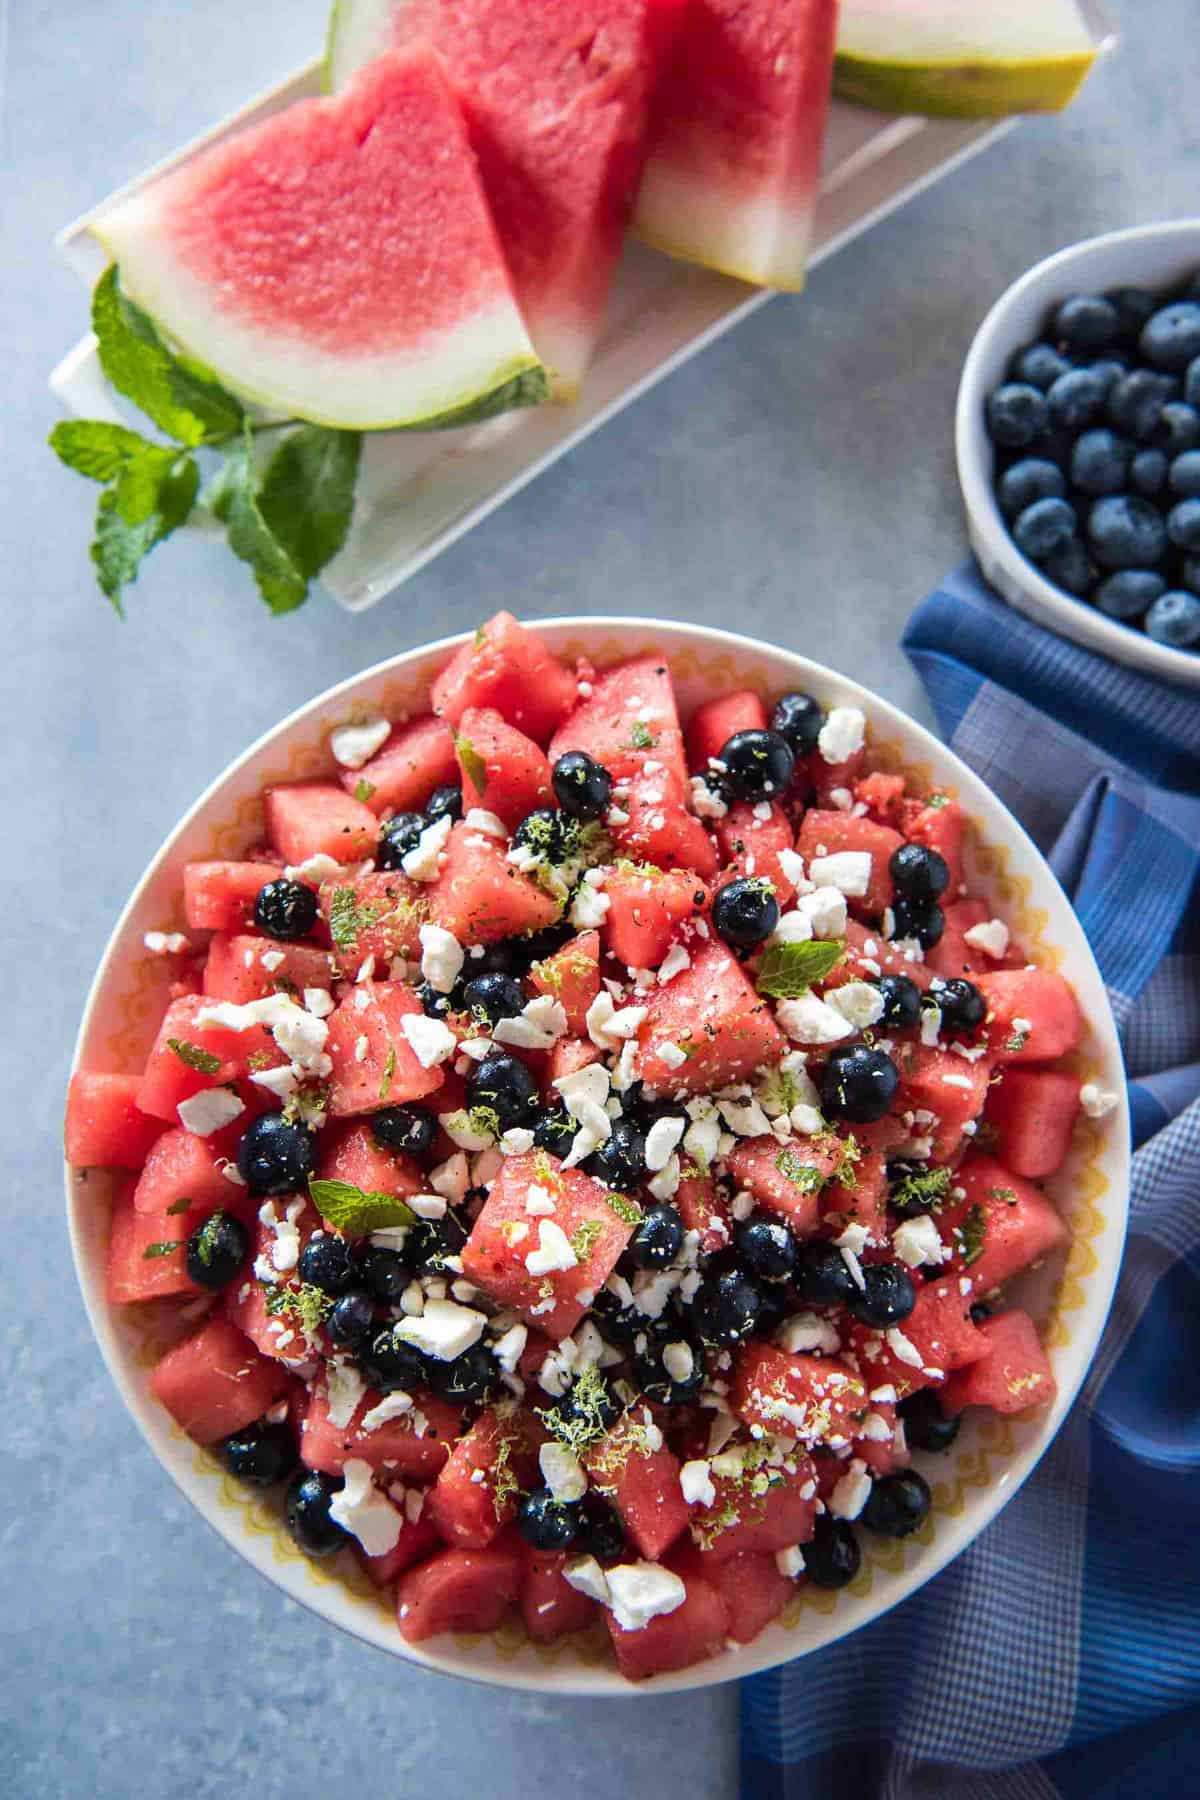 A bit of sweet, a little tart, and a touch of savory, this Blueberry Watermelon Salad is a delightful addition to any summer picnic! Fresh blueberries & watermelon play nicely with lime, feta, and refreshing mint. 